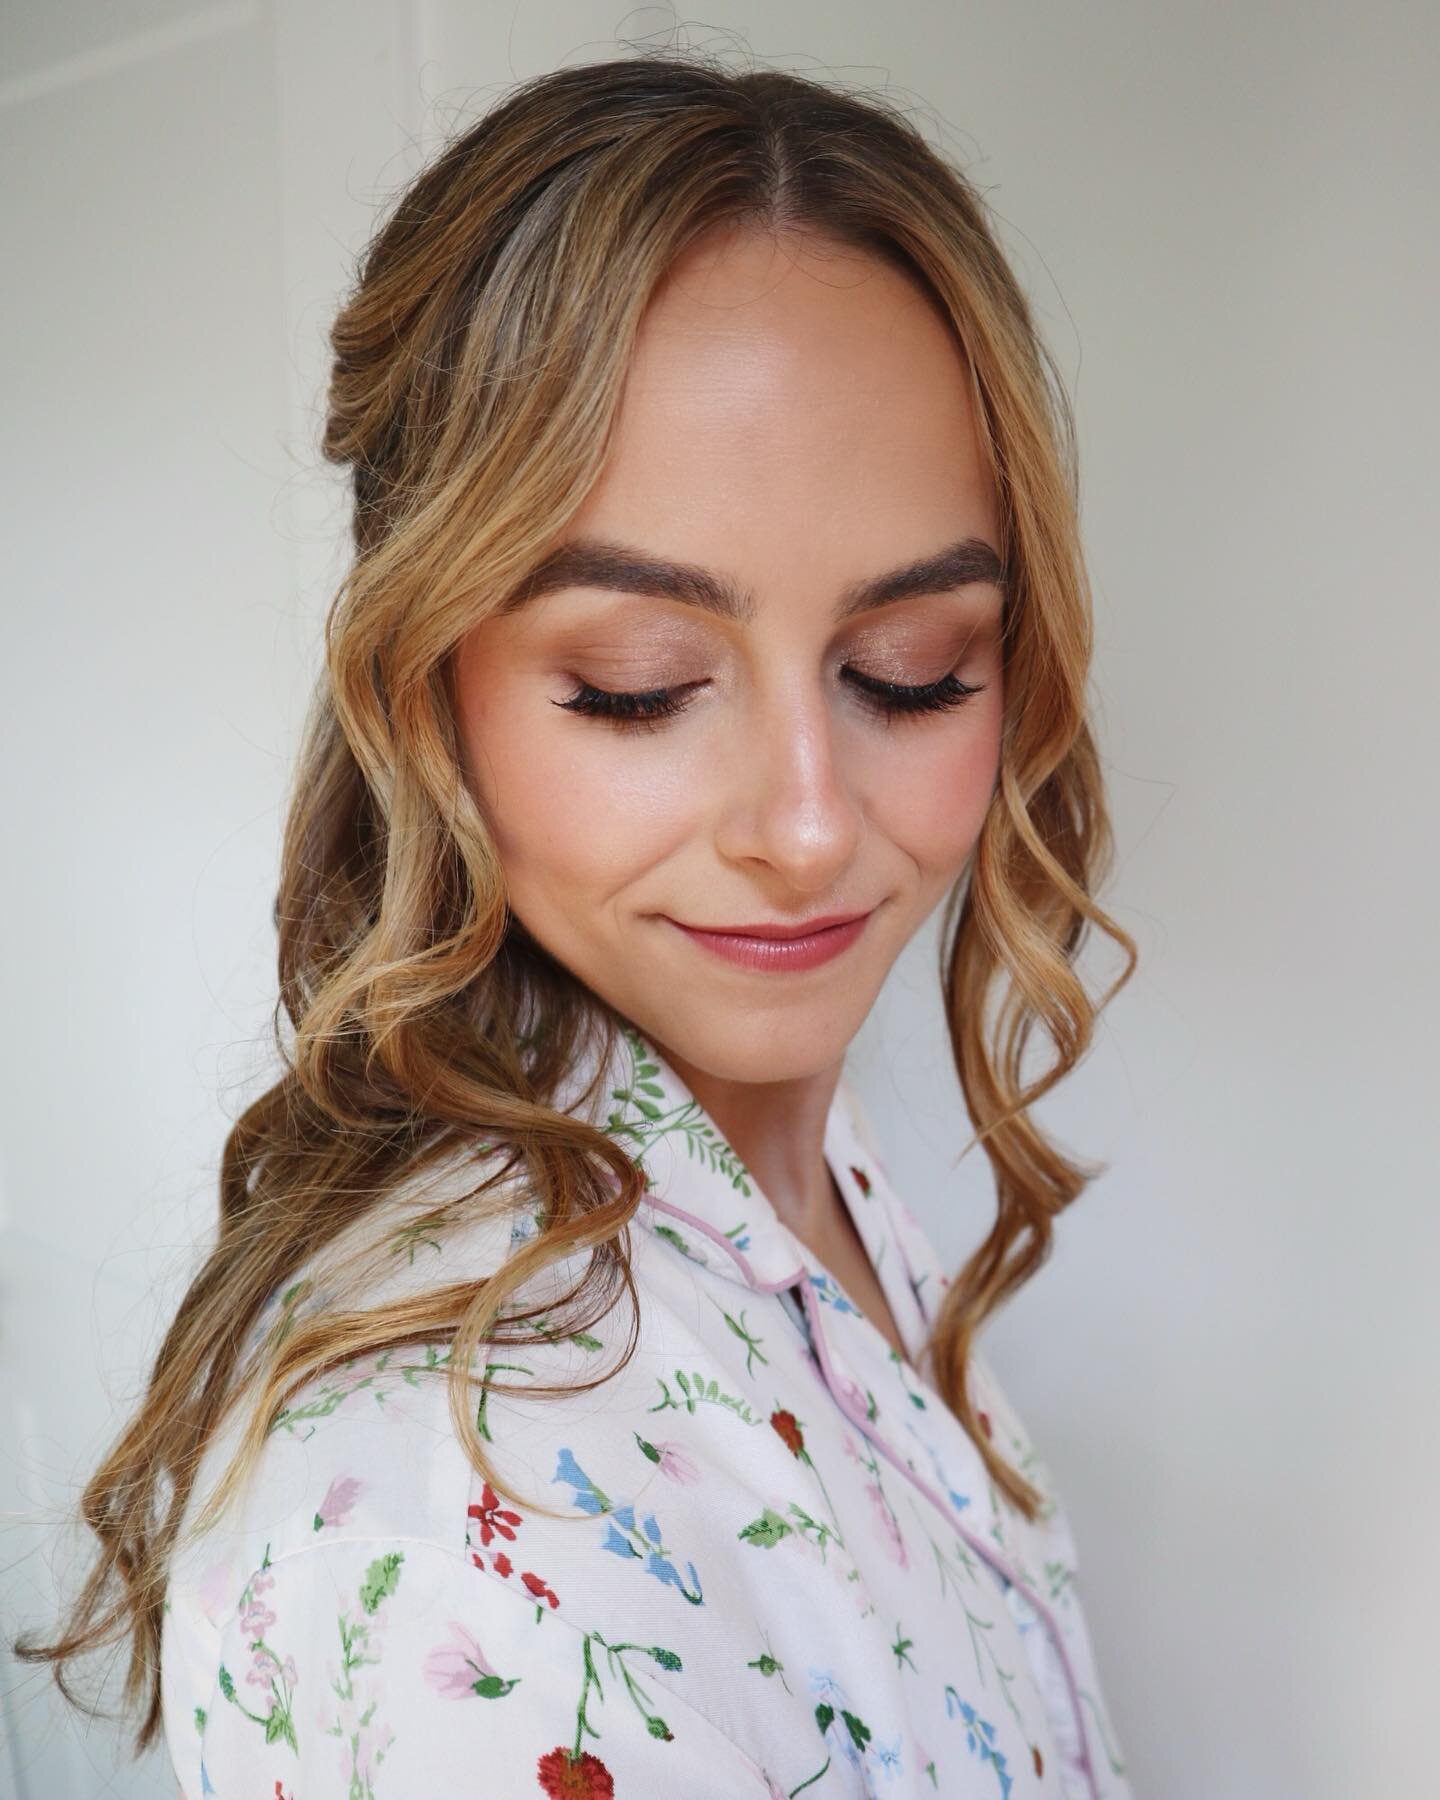 Felt so lucky to be apart of Leah&rsquo;s big day. She and her crew were beyond lovely and treated me and my team like old friends. 
.

Breakdown of this look. Leah wanted glowy skin with warm toned eyes and a highlighted corner. I love a fresh and m